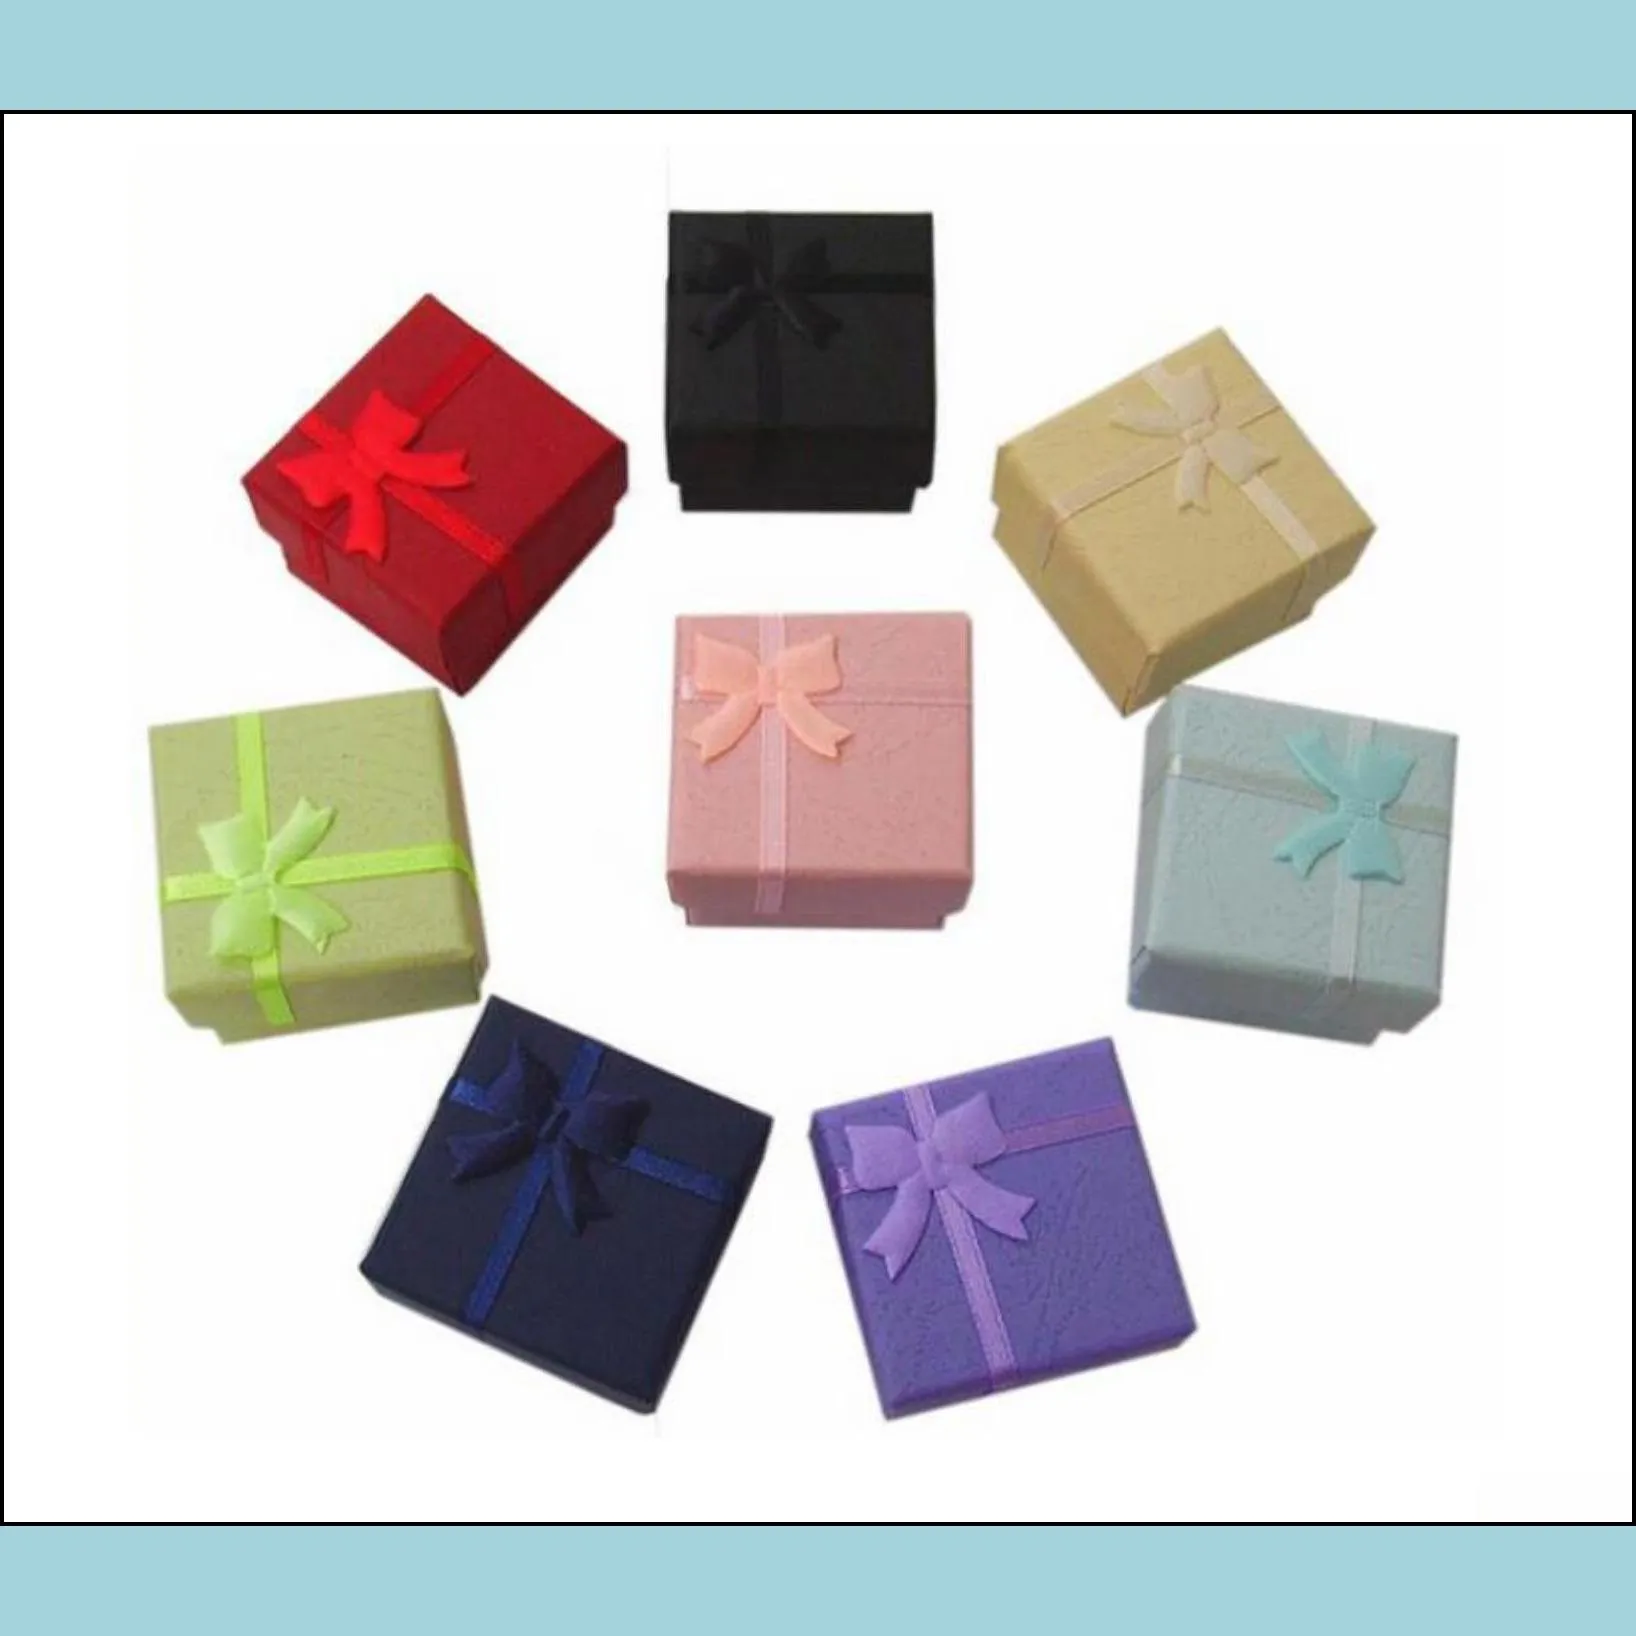 boxes packaging display jewelrywholesale 50 pcs /lot square ring earring necklace jewelry box gift present case holder set w334 ayepd